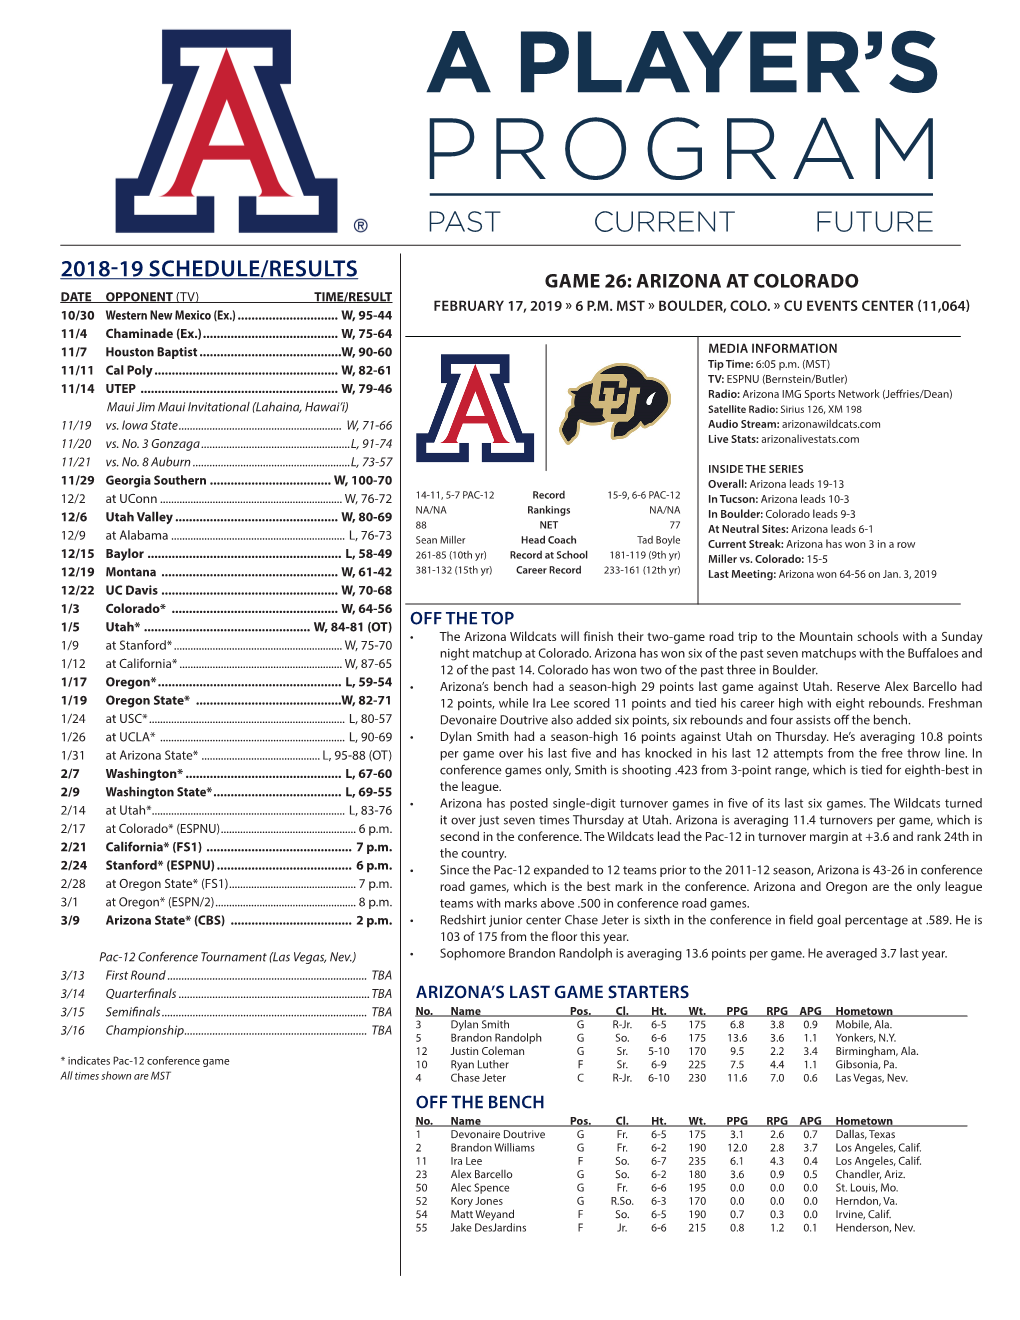 2018-19 Schedule/Results Game 26: Arizona at Colorado Date Opponent (Tv) Time/Result February 17, 2019 » 6 P.M